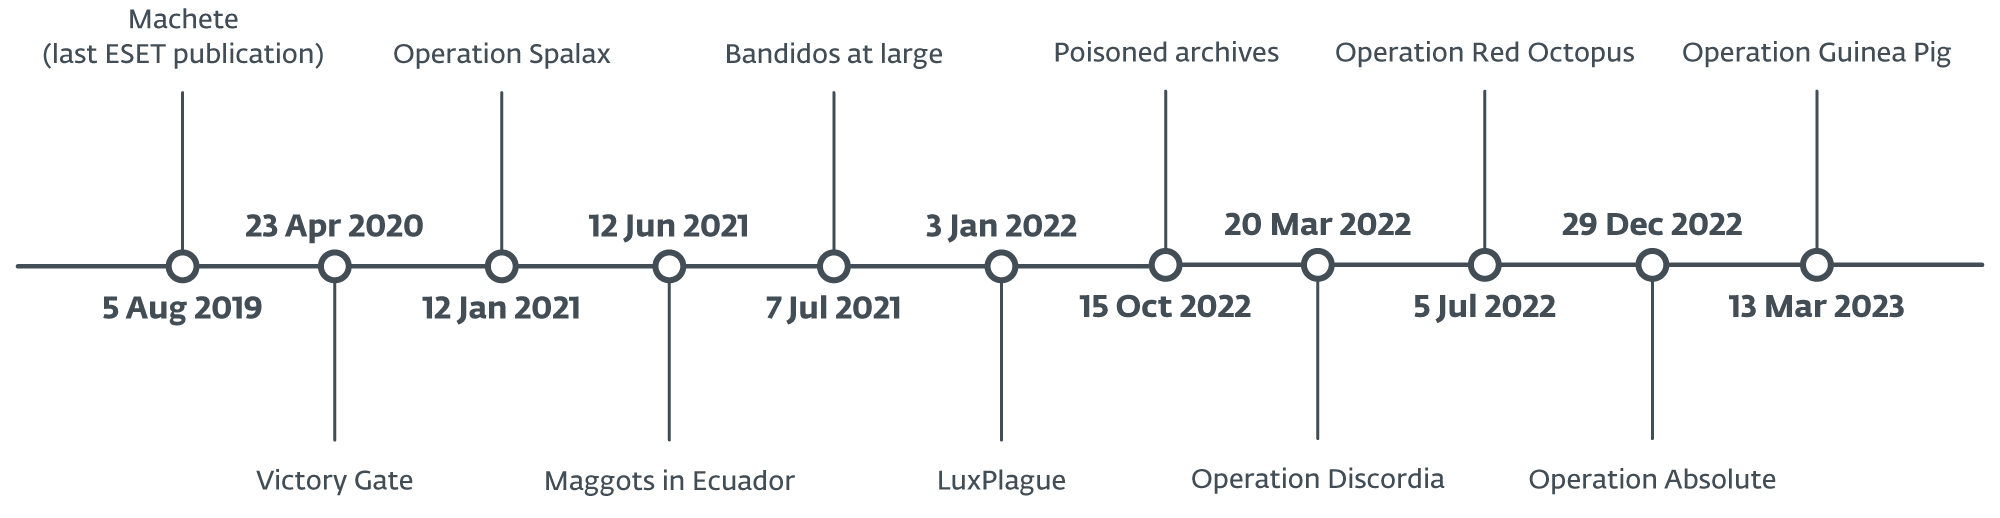 Figure 1 - Timeline of publications on attacks in LATAM, tracked by ESET